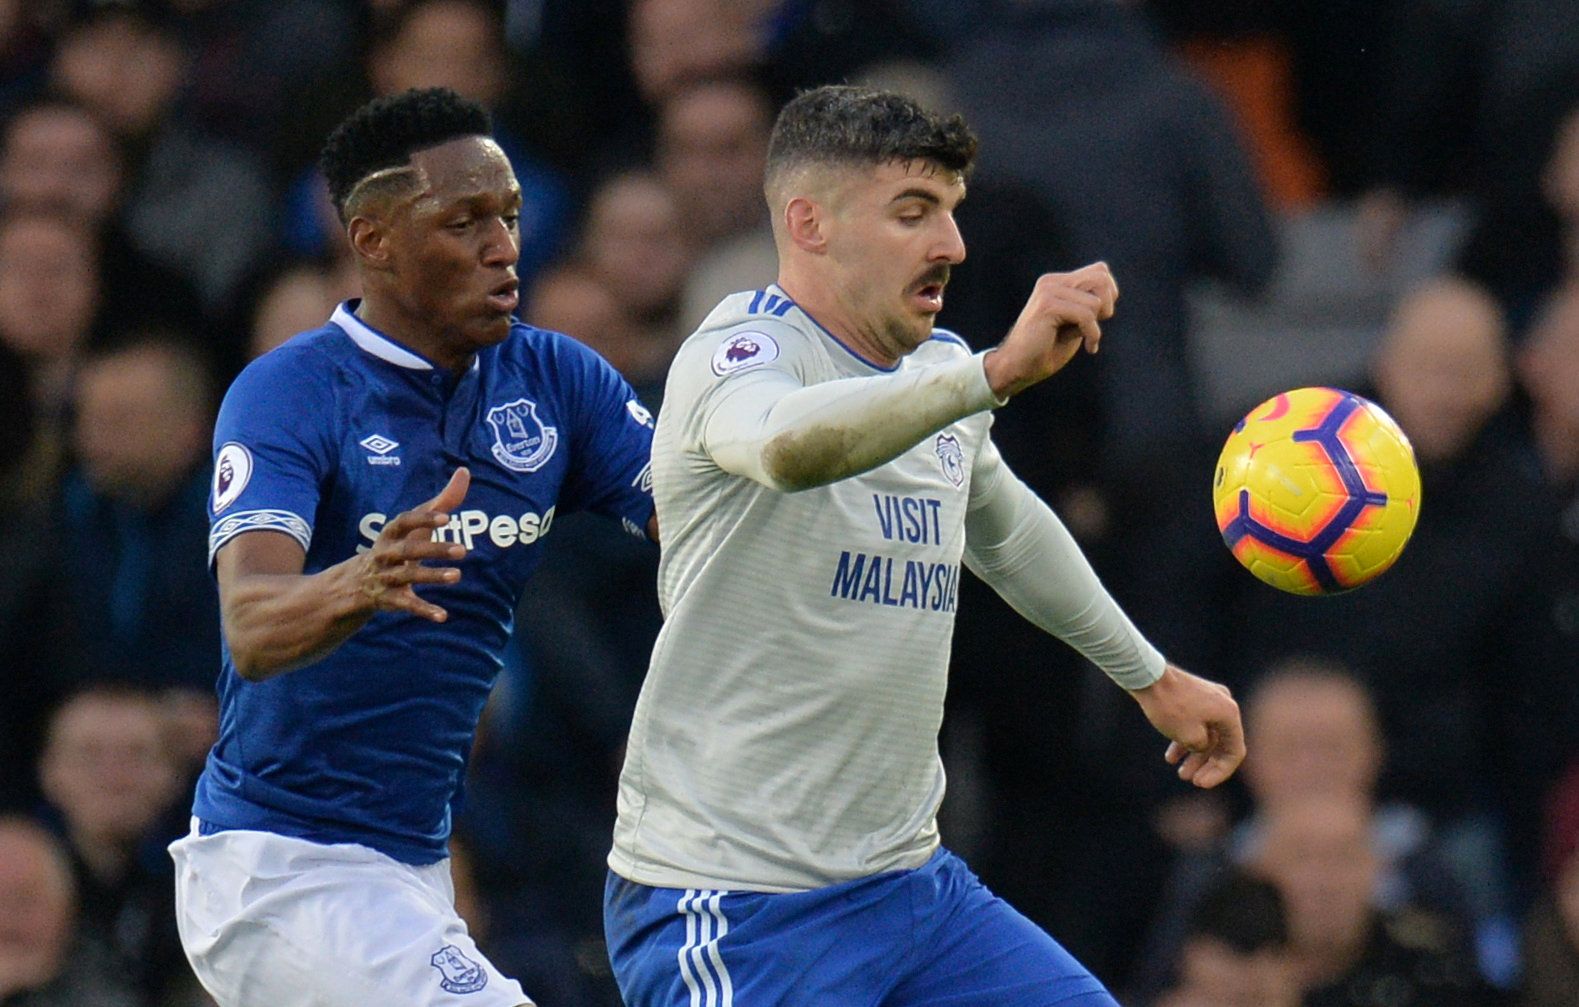 Soccer Football - Premier League - Everton v Cardiff City - Goodison Park, Liverpool, Britain - November 24, 2018  Everton's Yerry Mina in action with Cardiff City's Callum Paterson   REUTERS/Peter Powell  EDITORIAL USE ONLY. No use with unauthorized audio, video, data, fixture lists, club/league logos or 